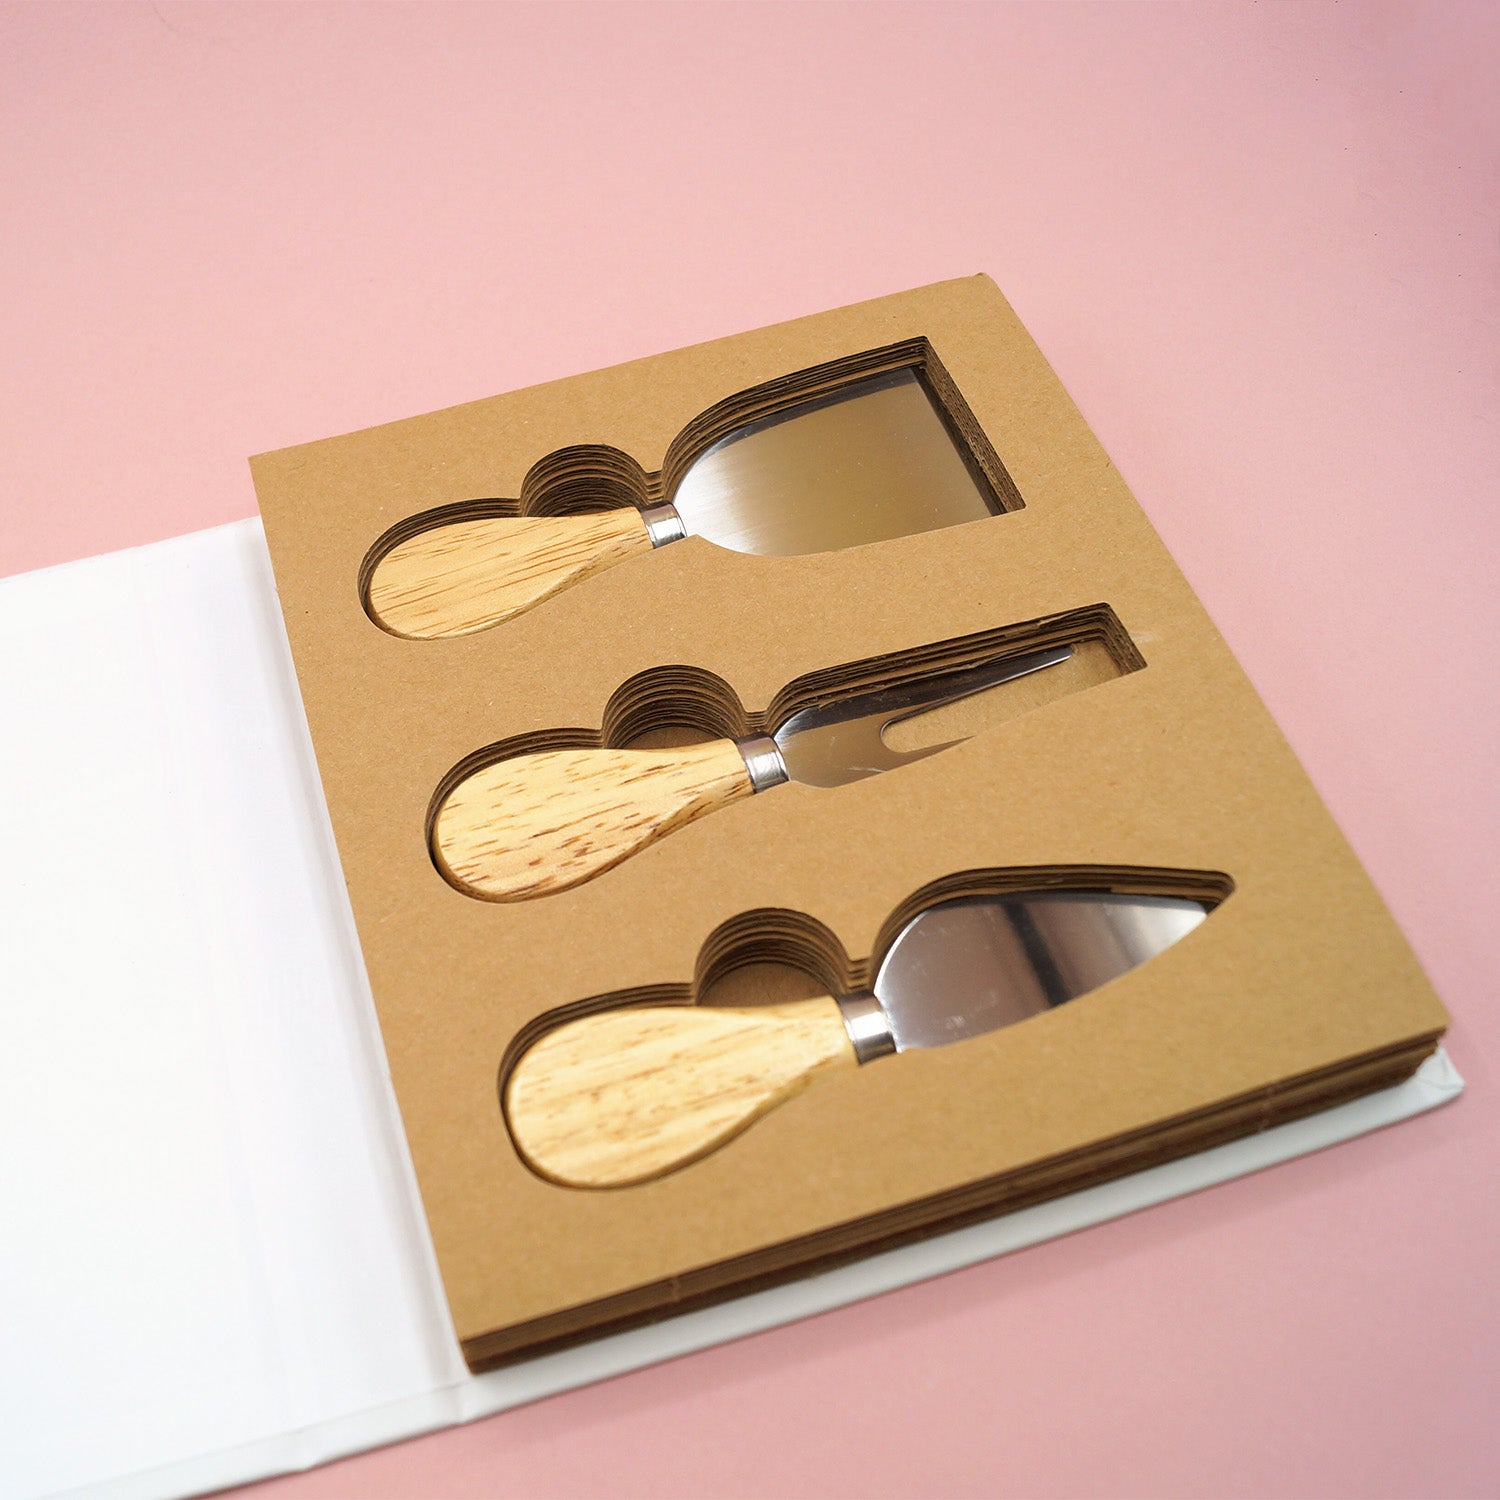 An open box shows a 3 piece cheese knife set including a flat blade knife, cheese fork, and spade knife. All have wooden handles.